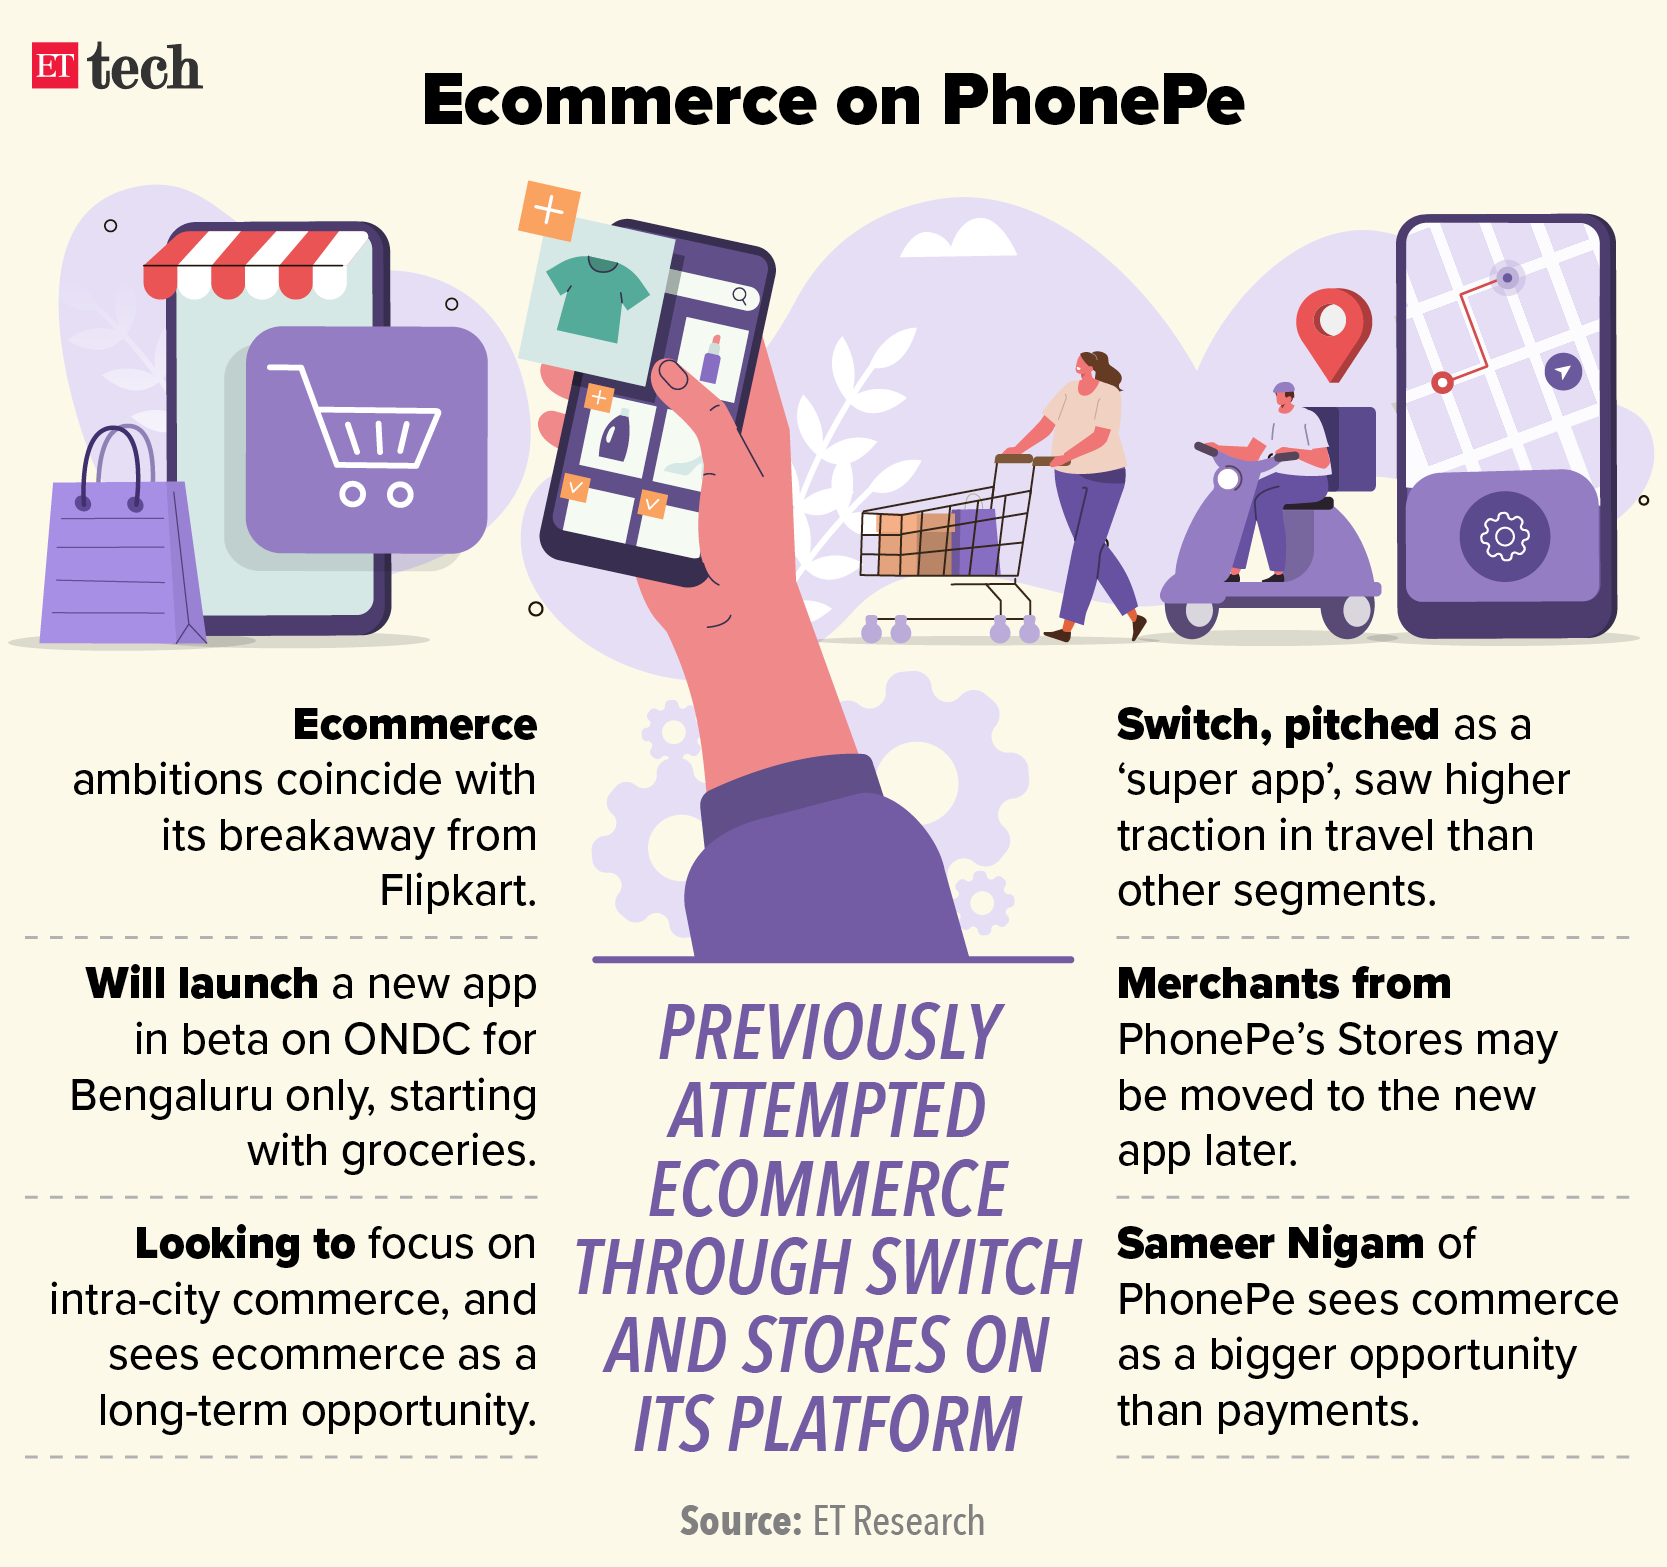 Ecommerce on PhonePe_Graphic_ETTECH